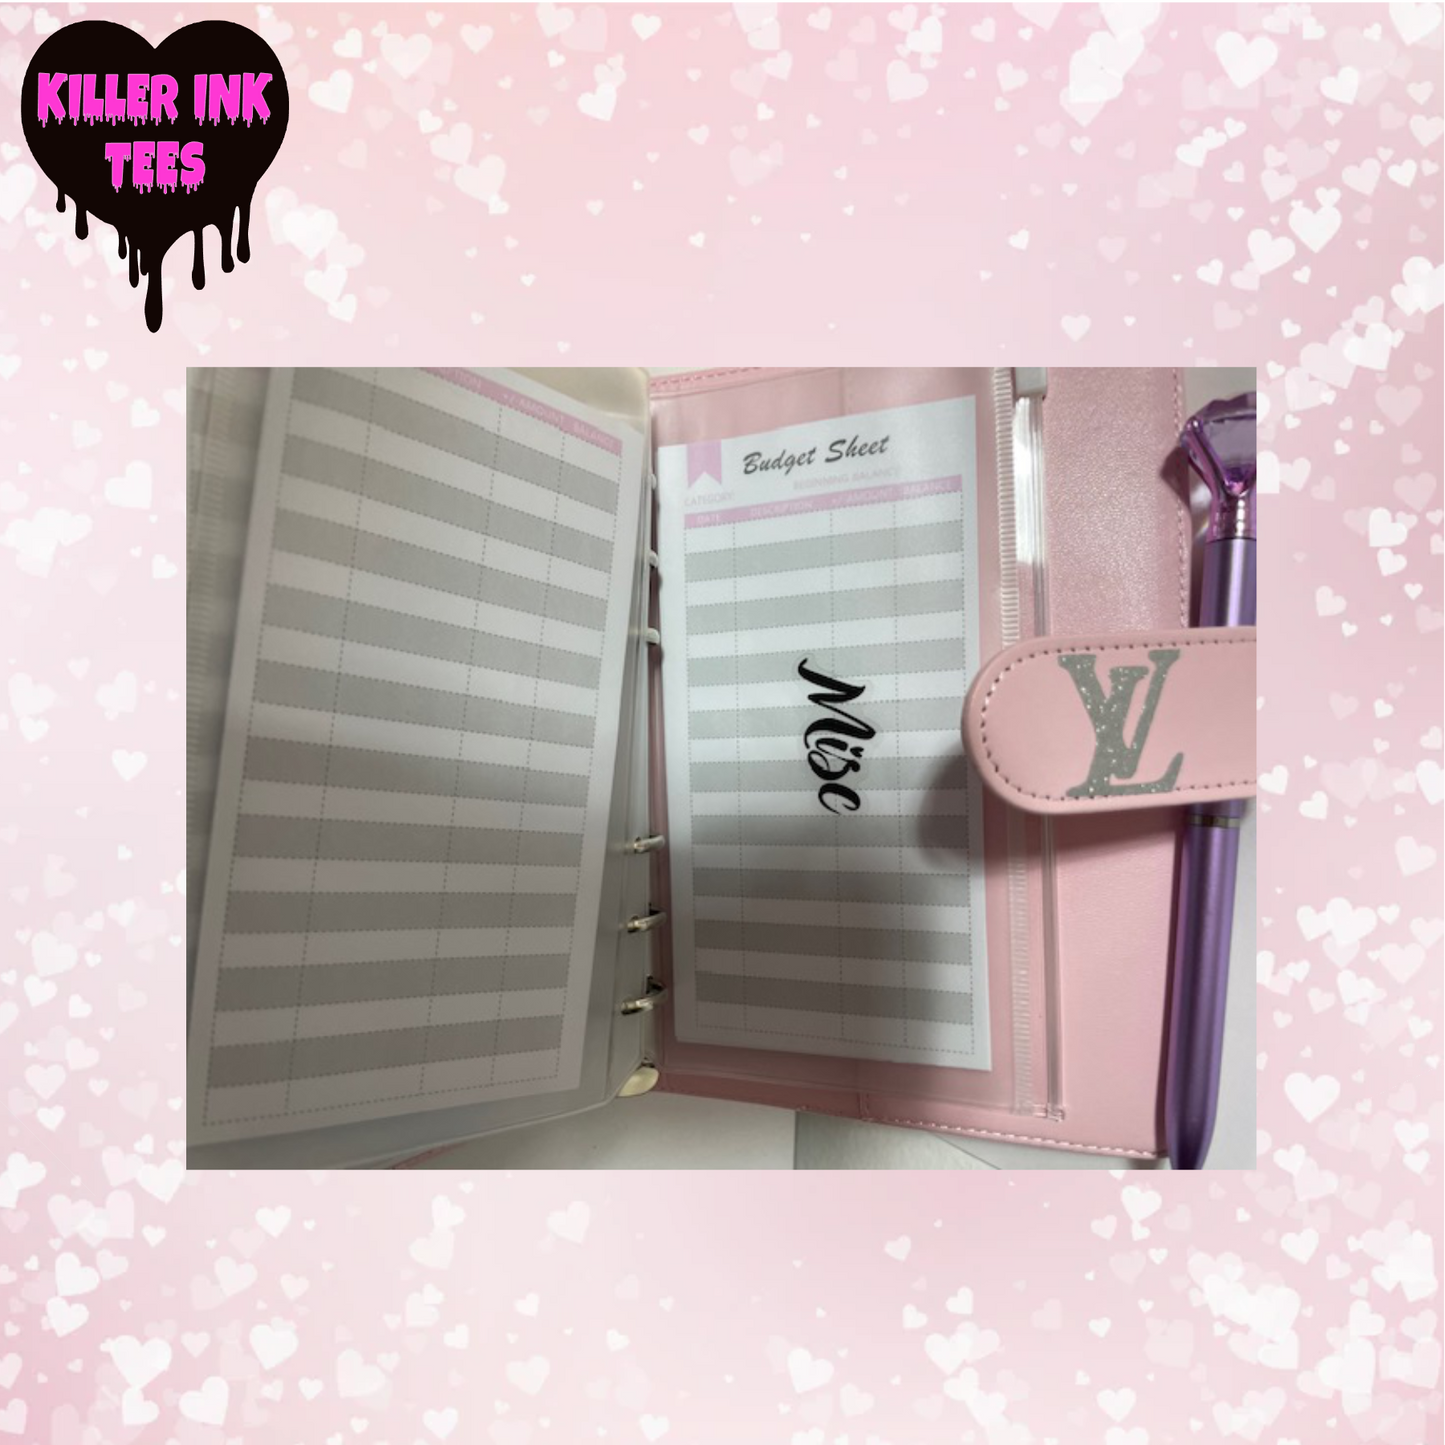 LV Pink Silver Budget Binder Free Pen Included